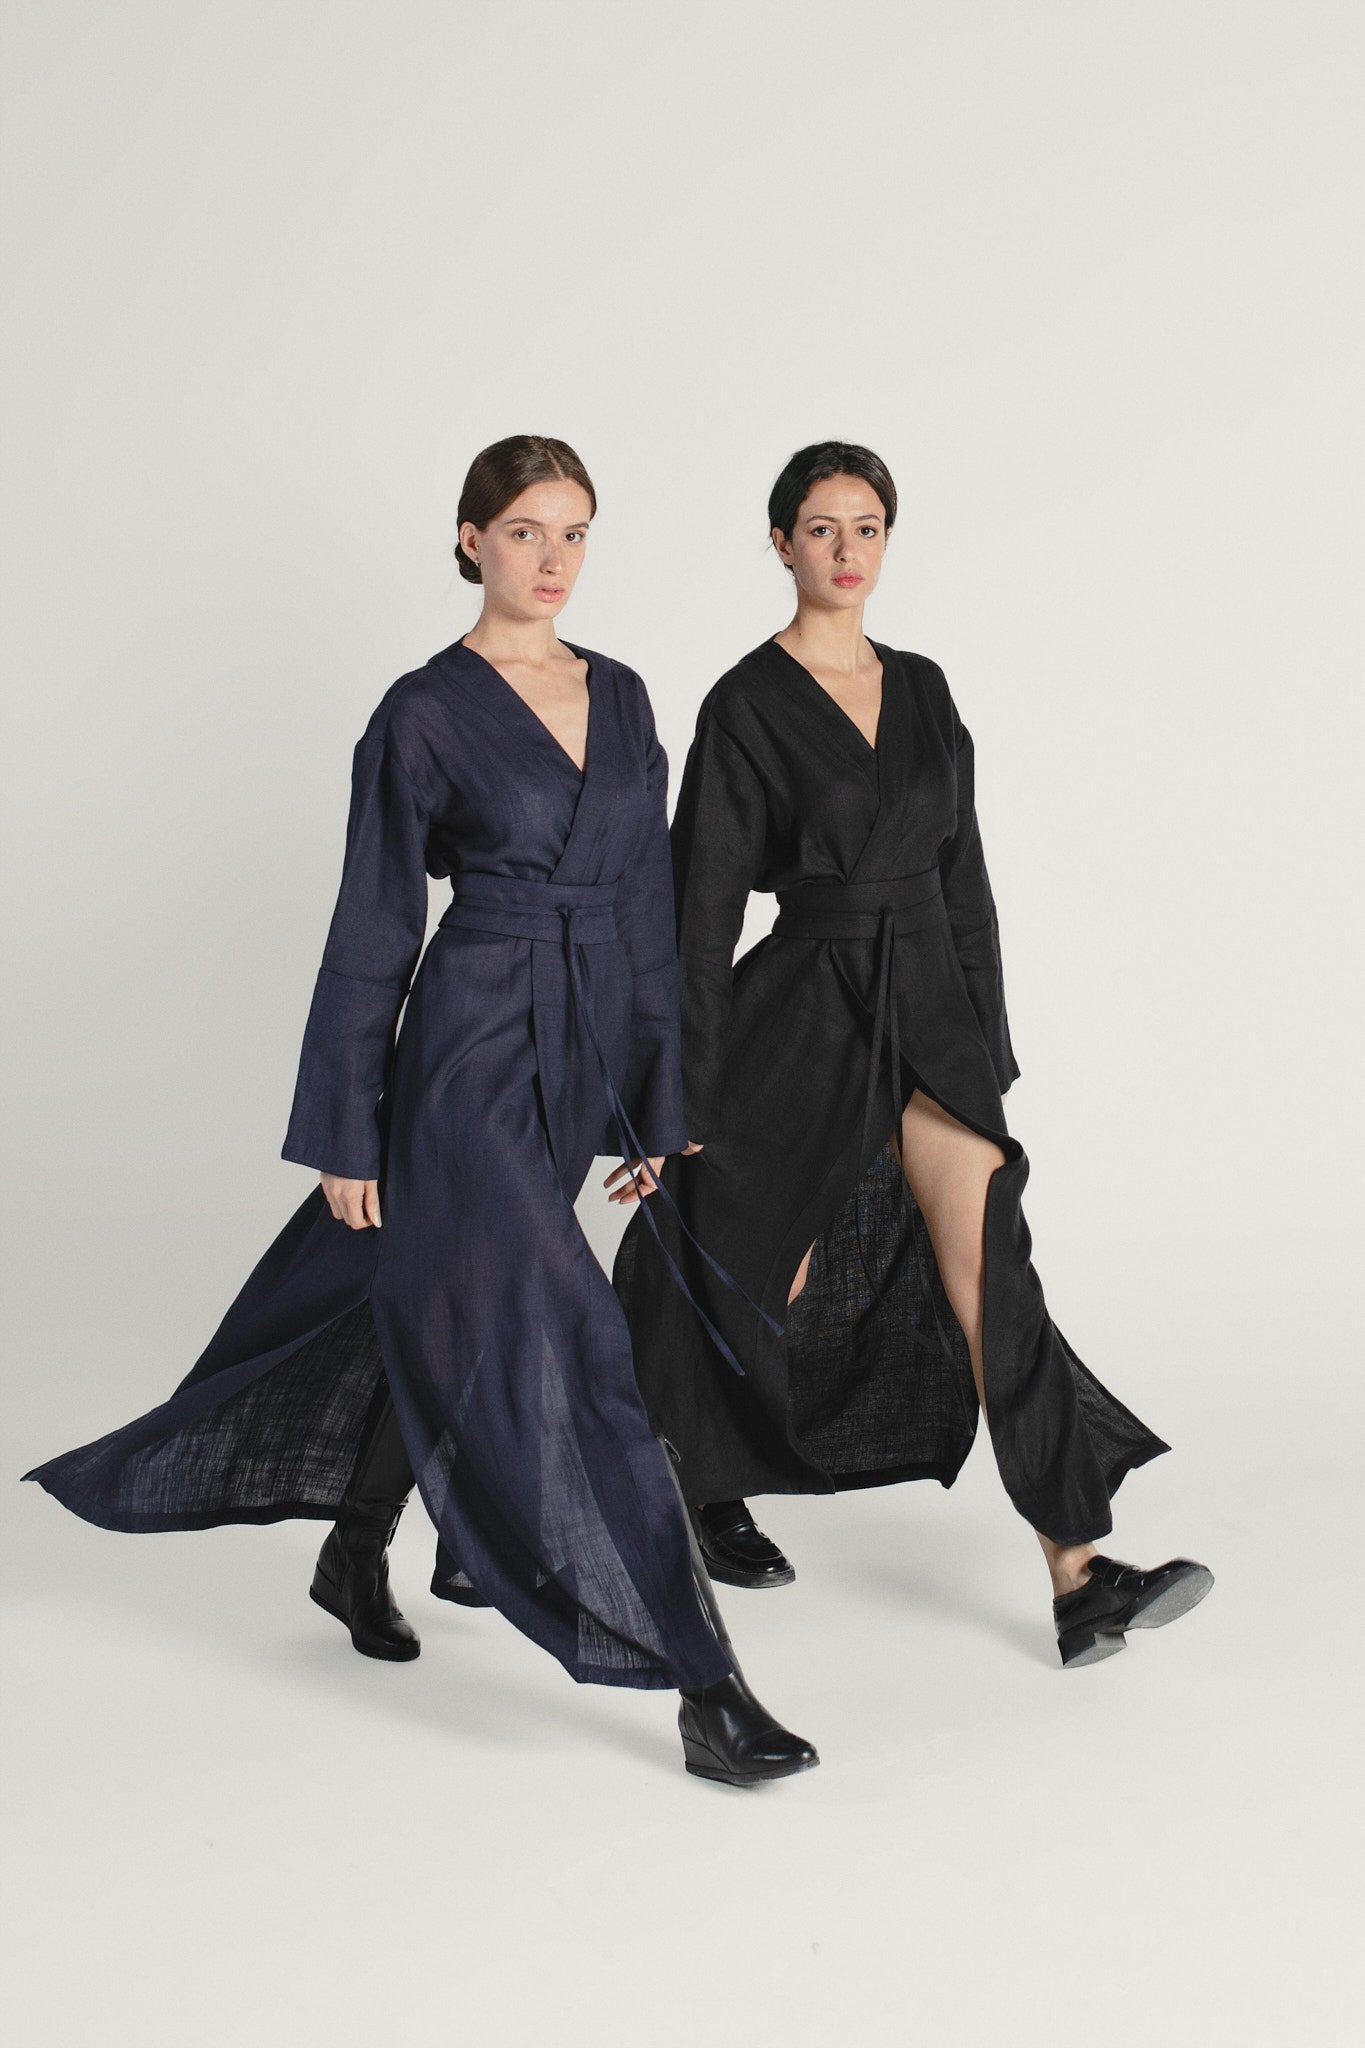 Two models cat walking and looking at the camera. One wearing a black linen kimono dress and another one wearin a midnight Blue linen kimono dress made by atelier mizuni